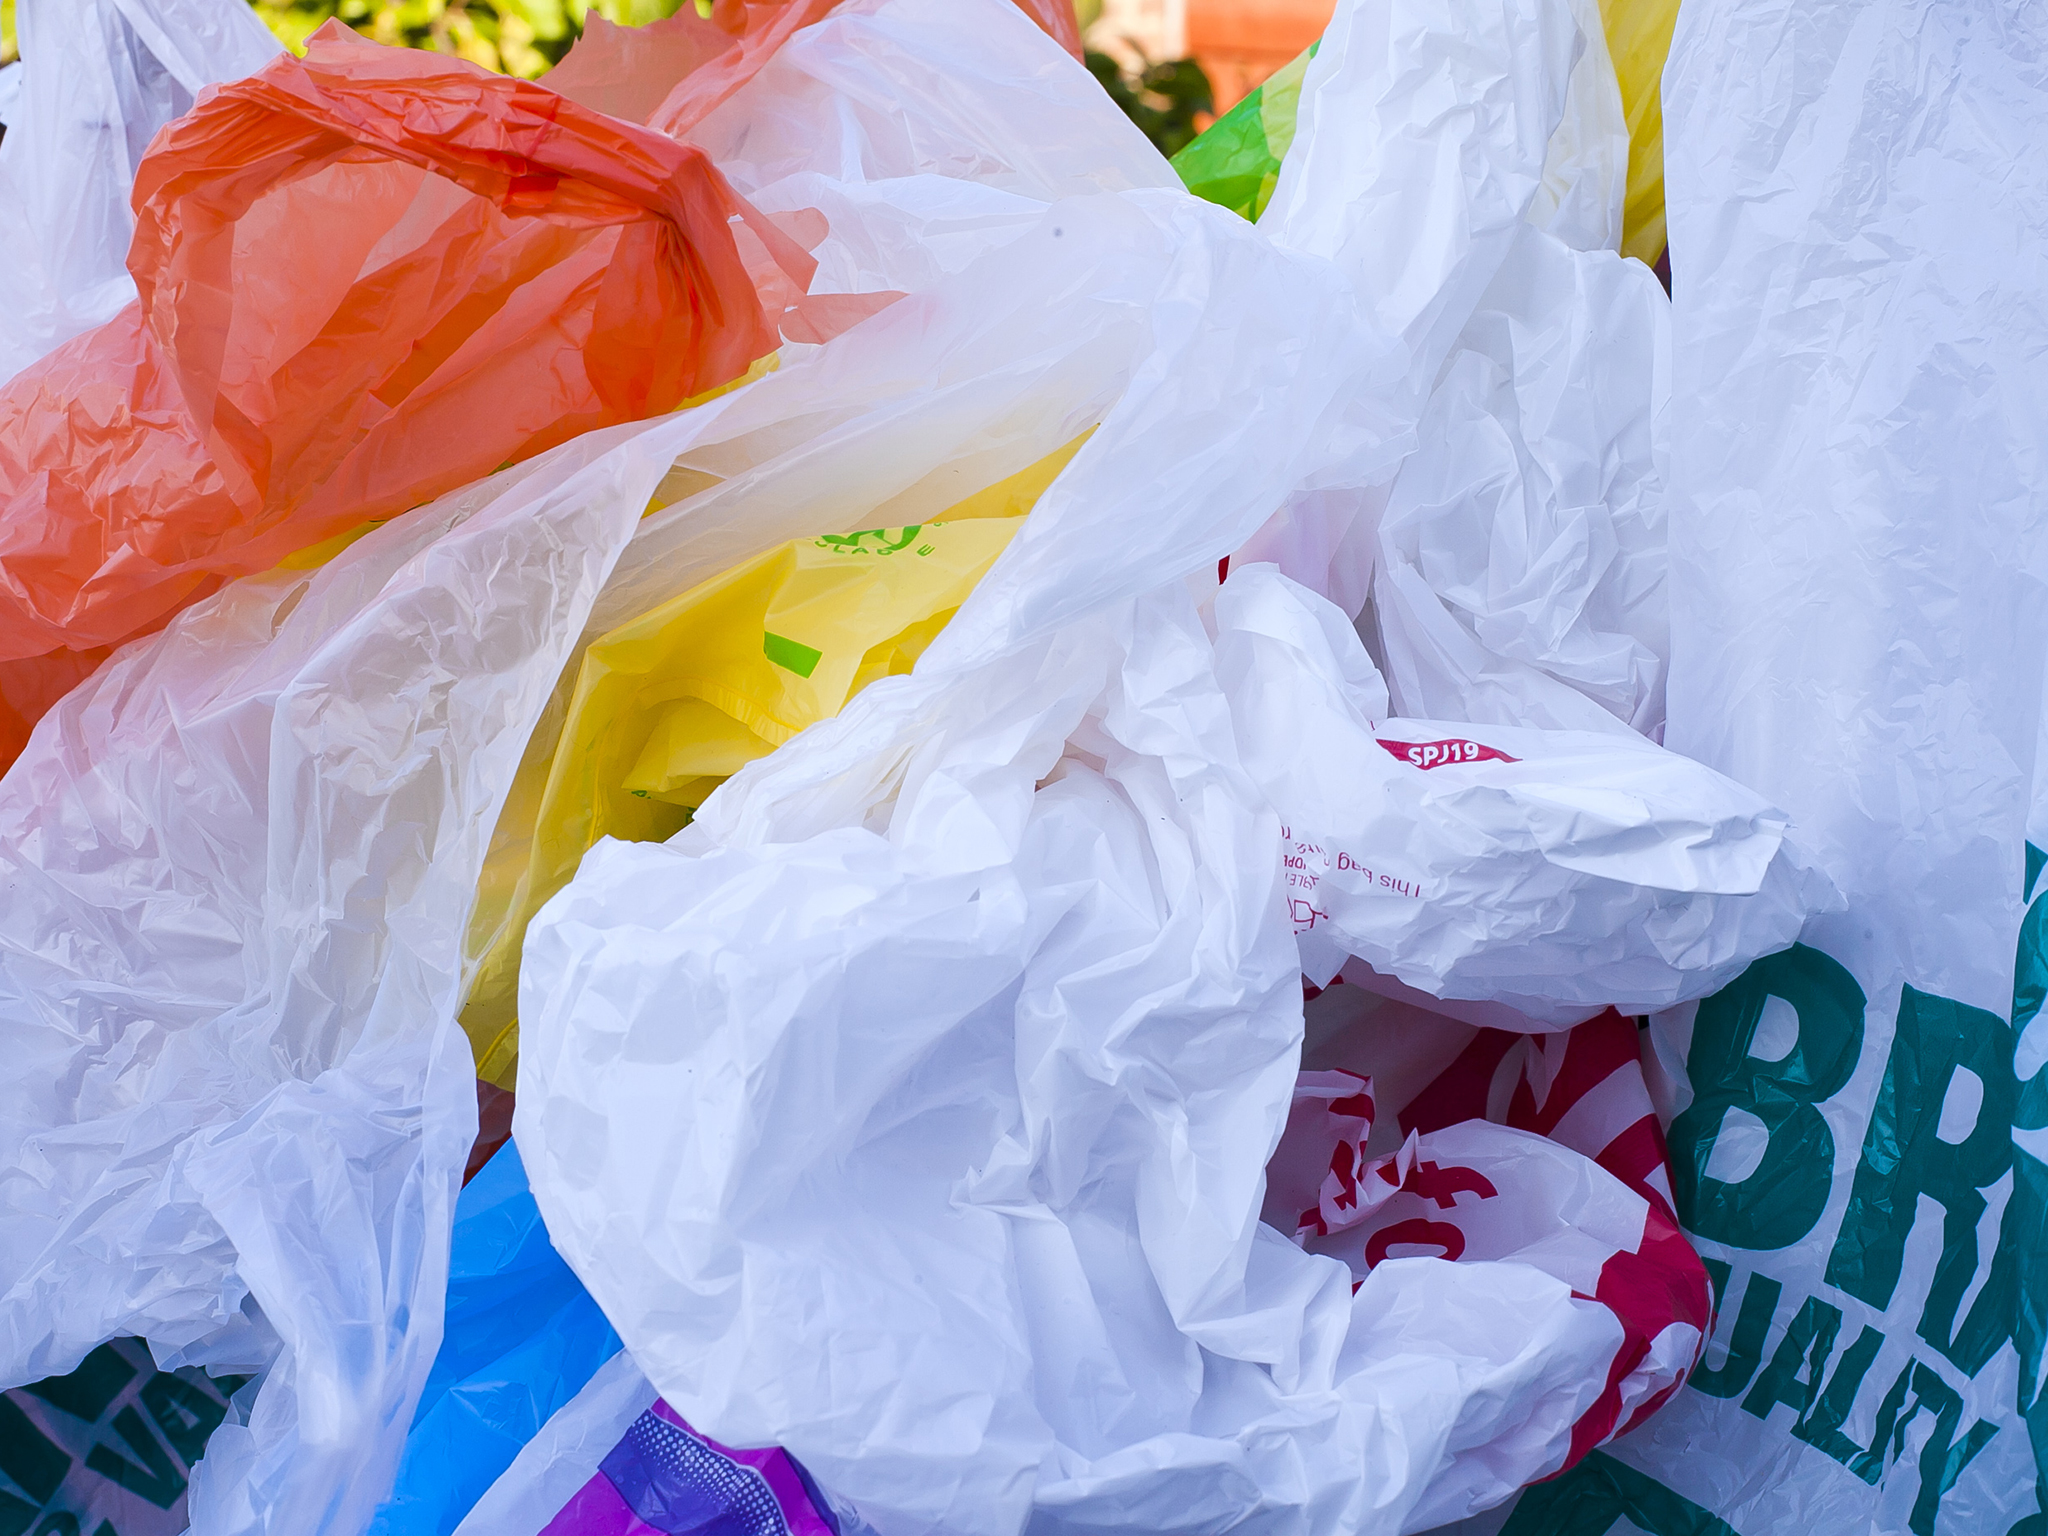 Plastic Bags Are Sacked in Jackson